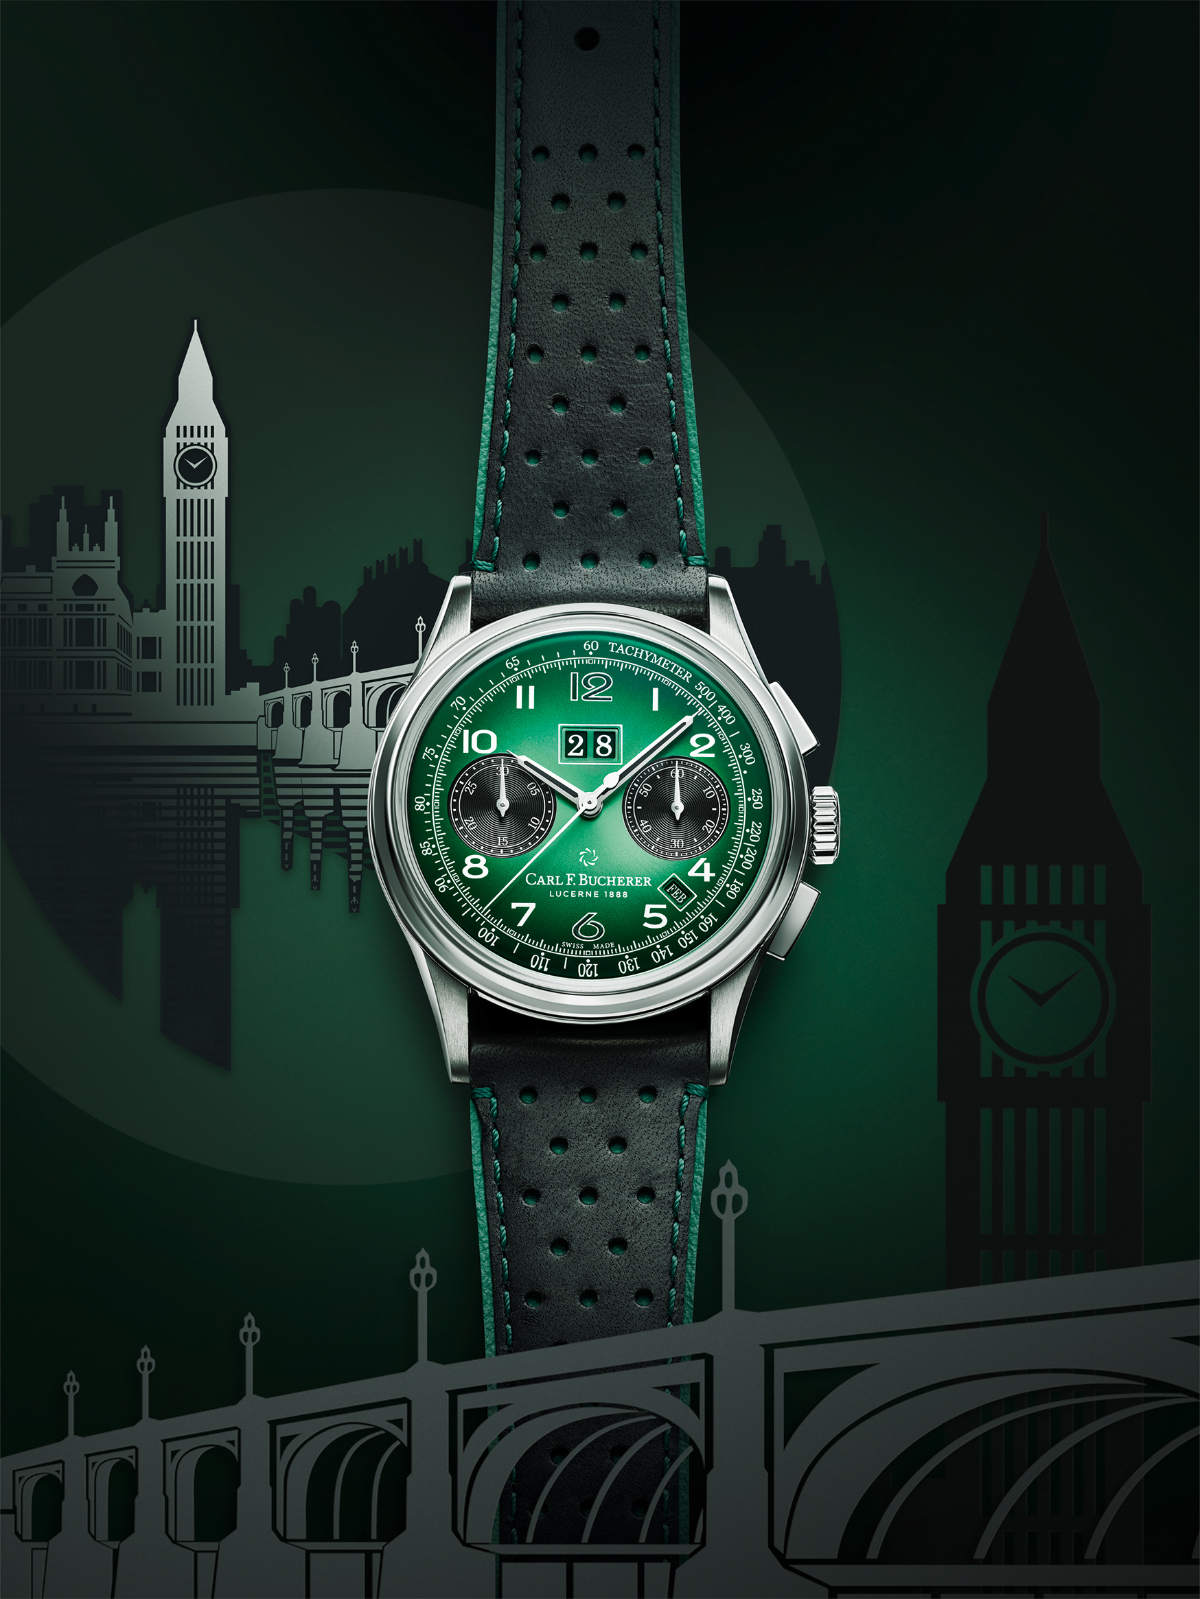 The Carl F. Bucherer Heritage Bicompax Annual Hometown Edition